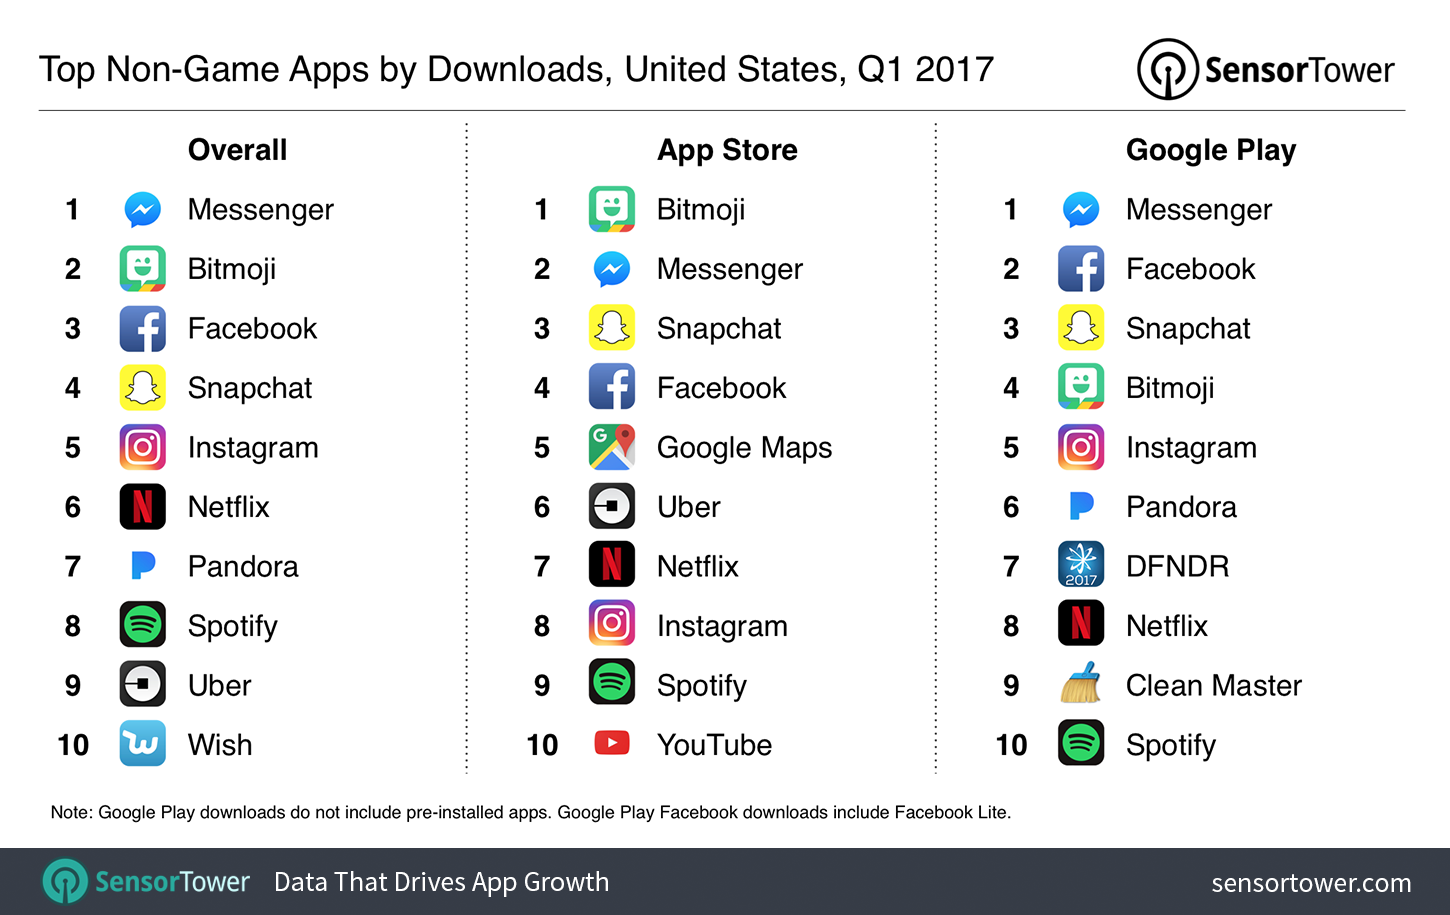 Q1 2017's Top Mobile Apps by United States Downloads